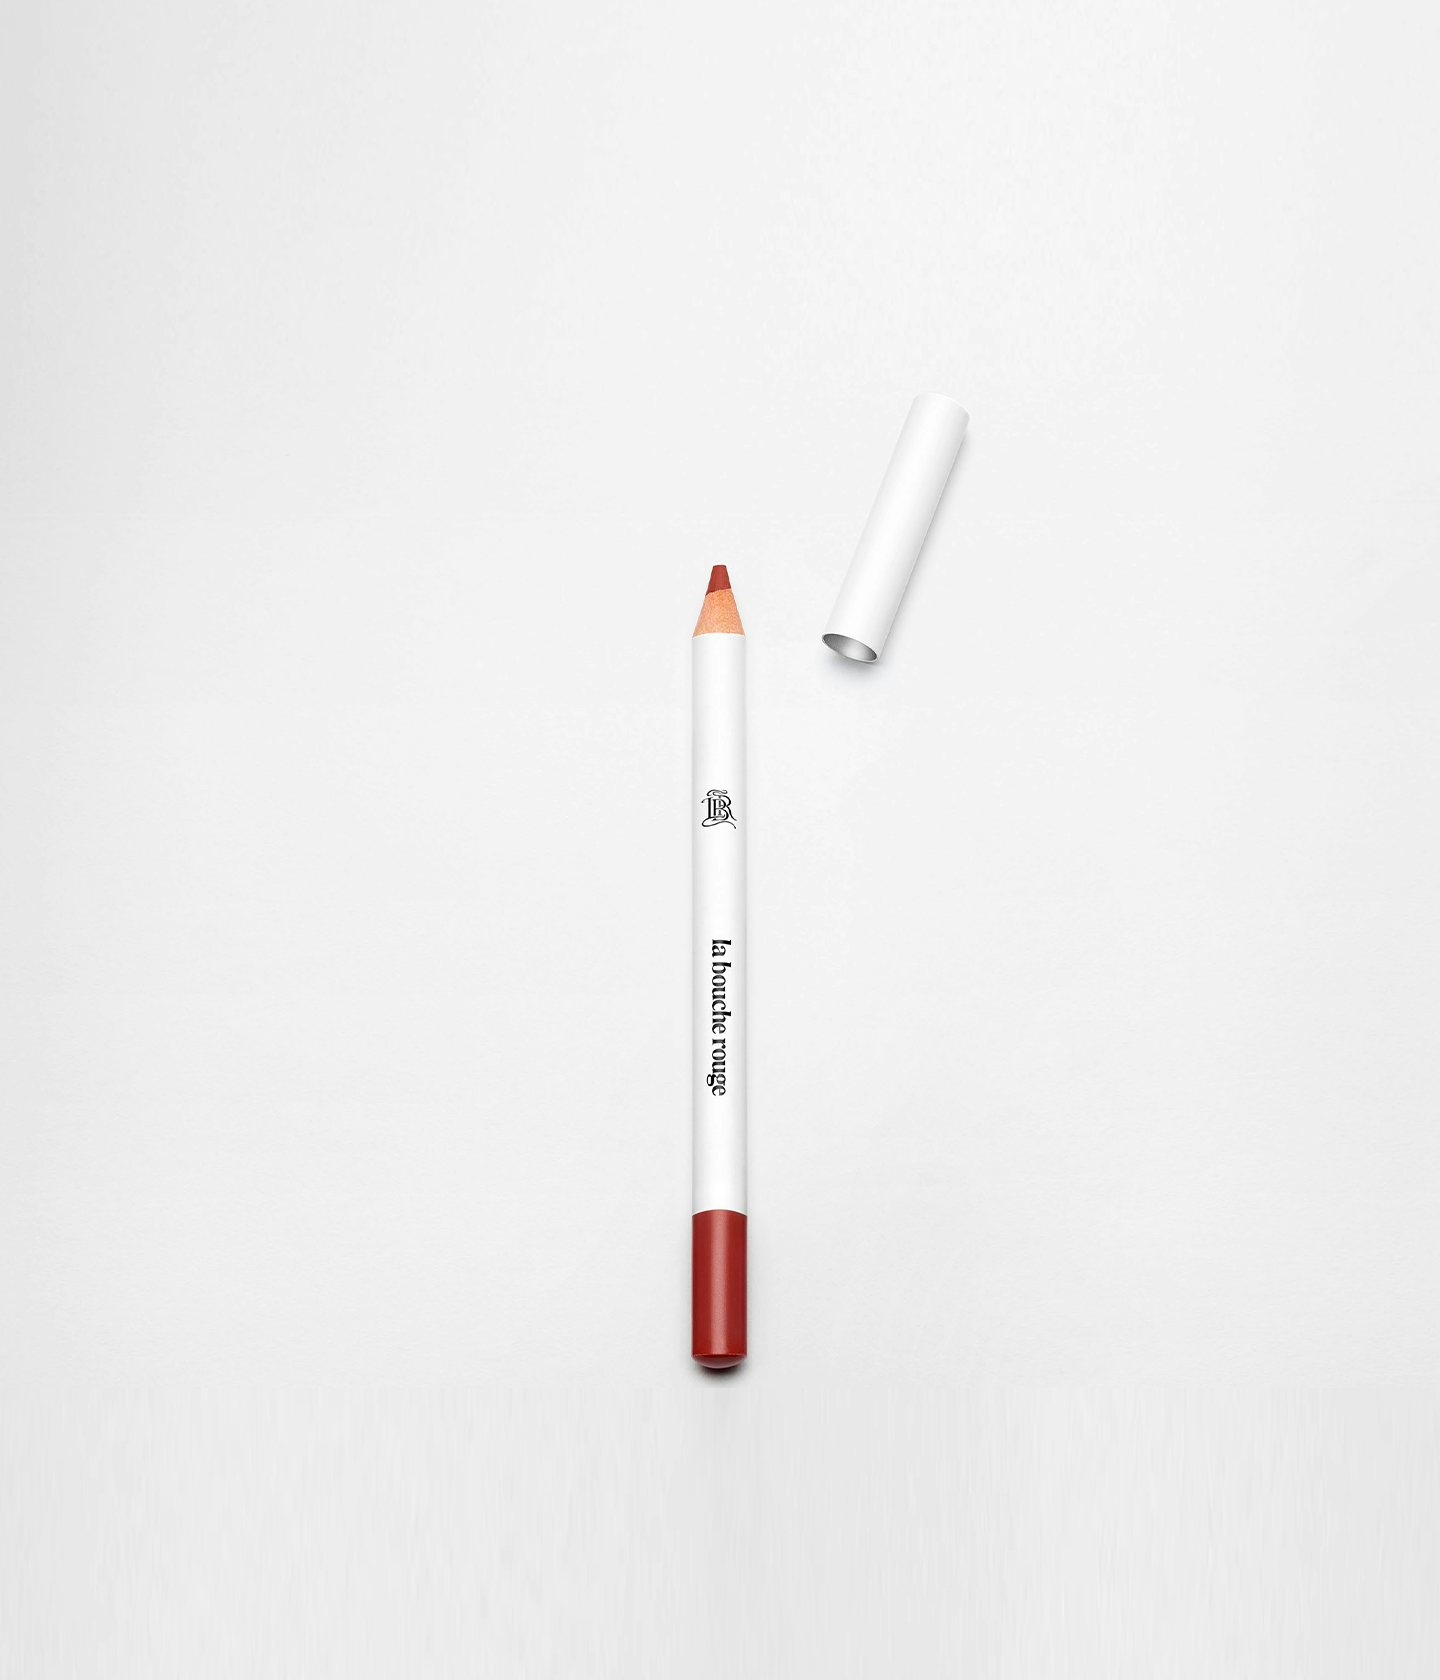 La bouche rouge Nude Brown lip pencil with recyclable metal cap